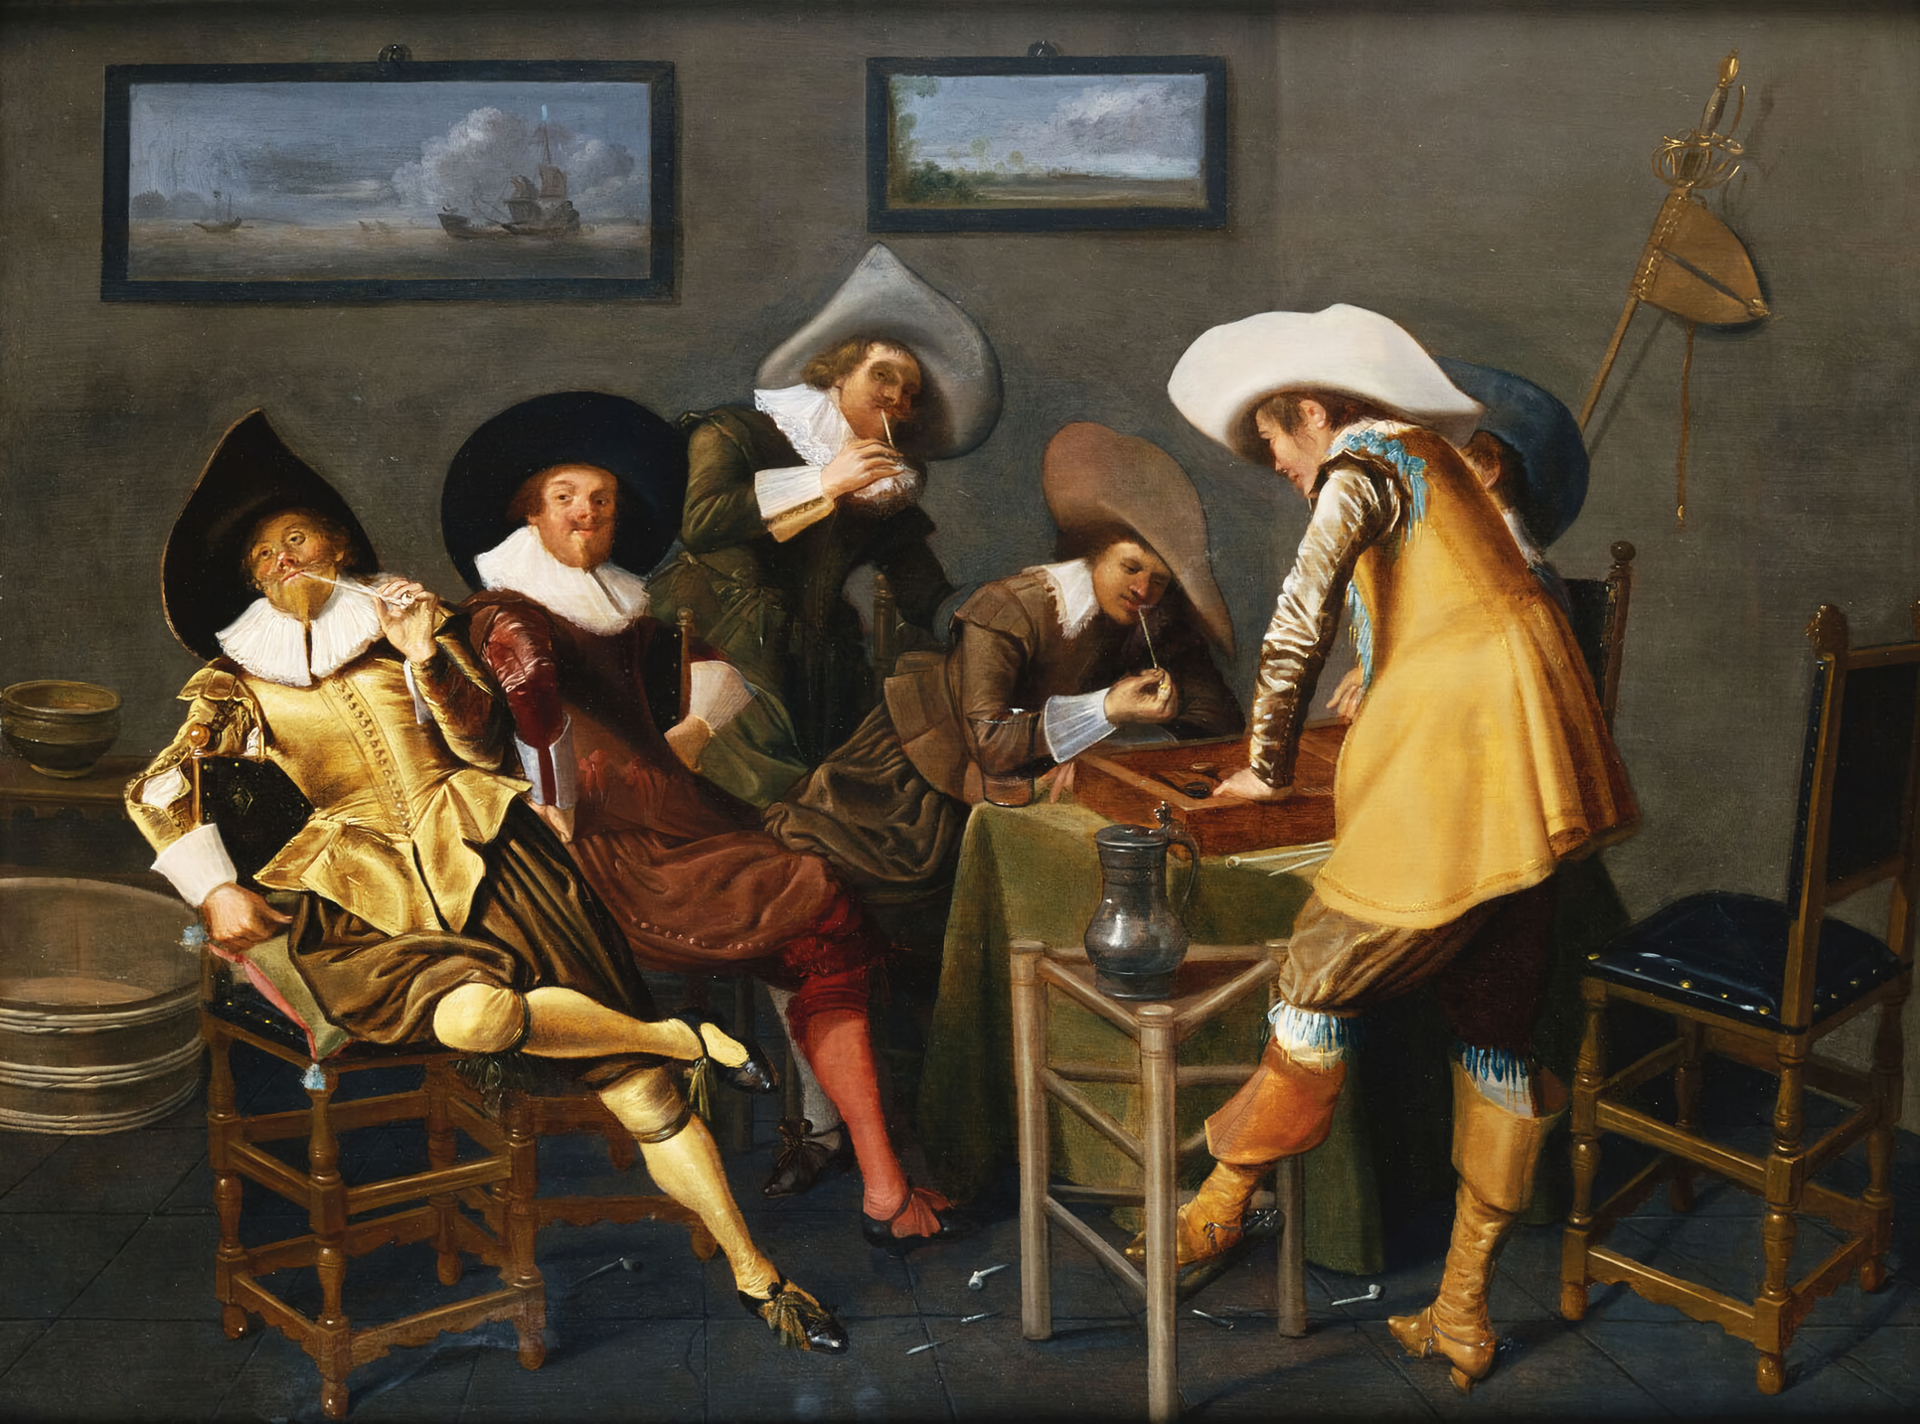 A group of men, dressed in Dutch Early Modern garb, are seen sitting in chairs and gathering around a game of backgammon.